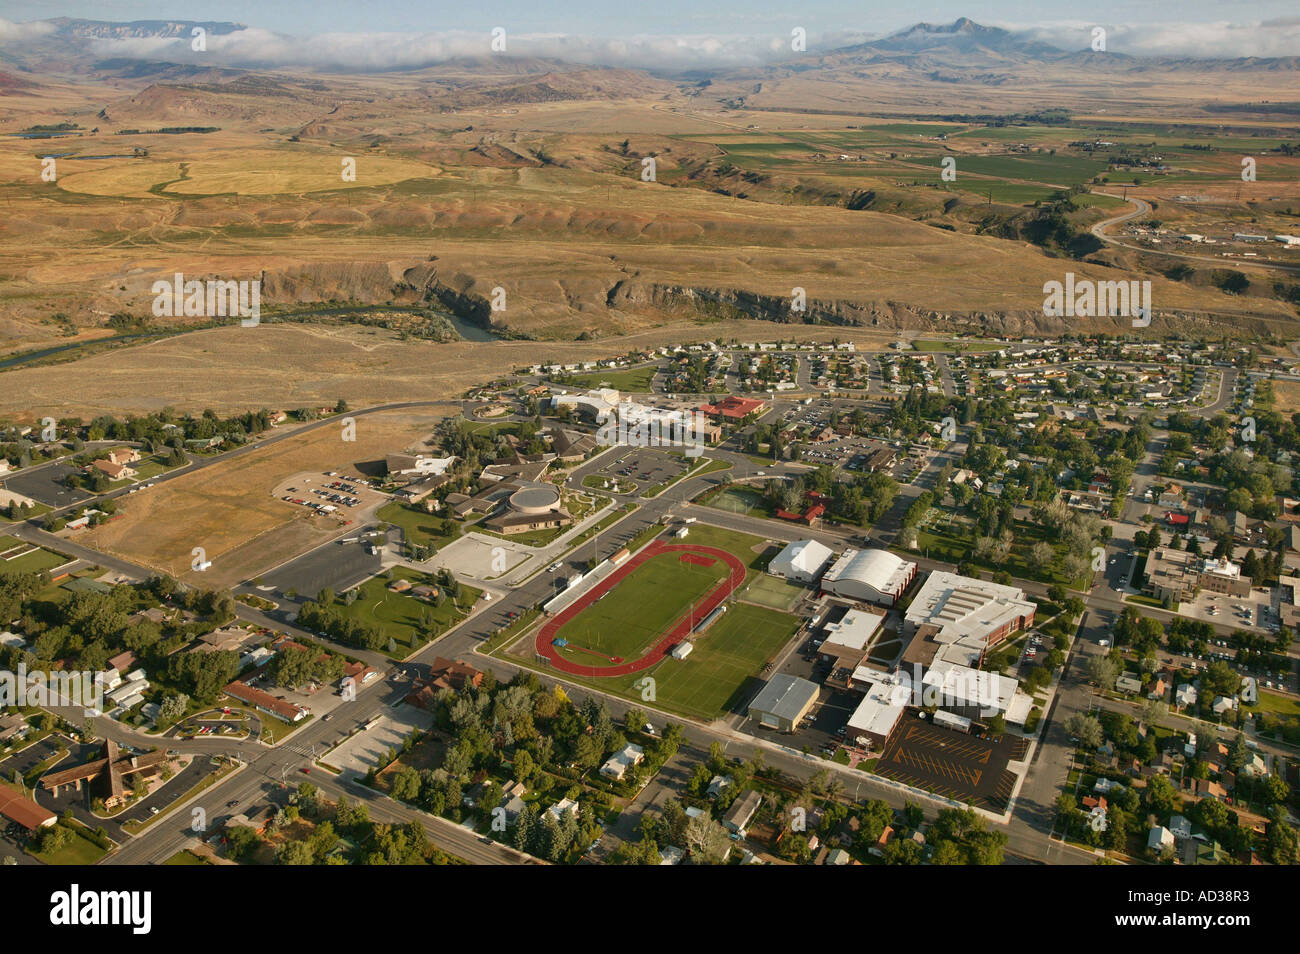 Aerial view of the town of Cody, Wyoming, USA. Stock Photo